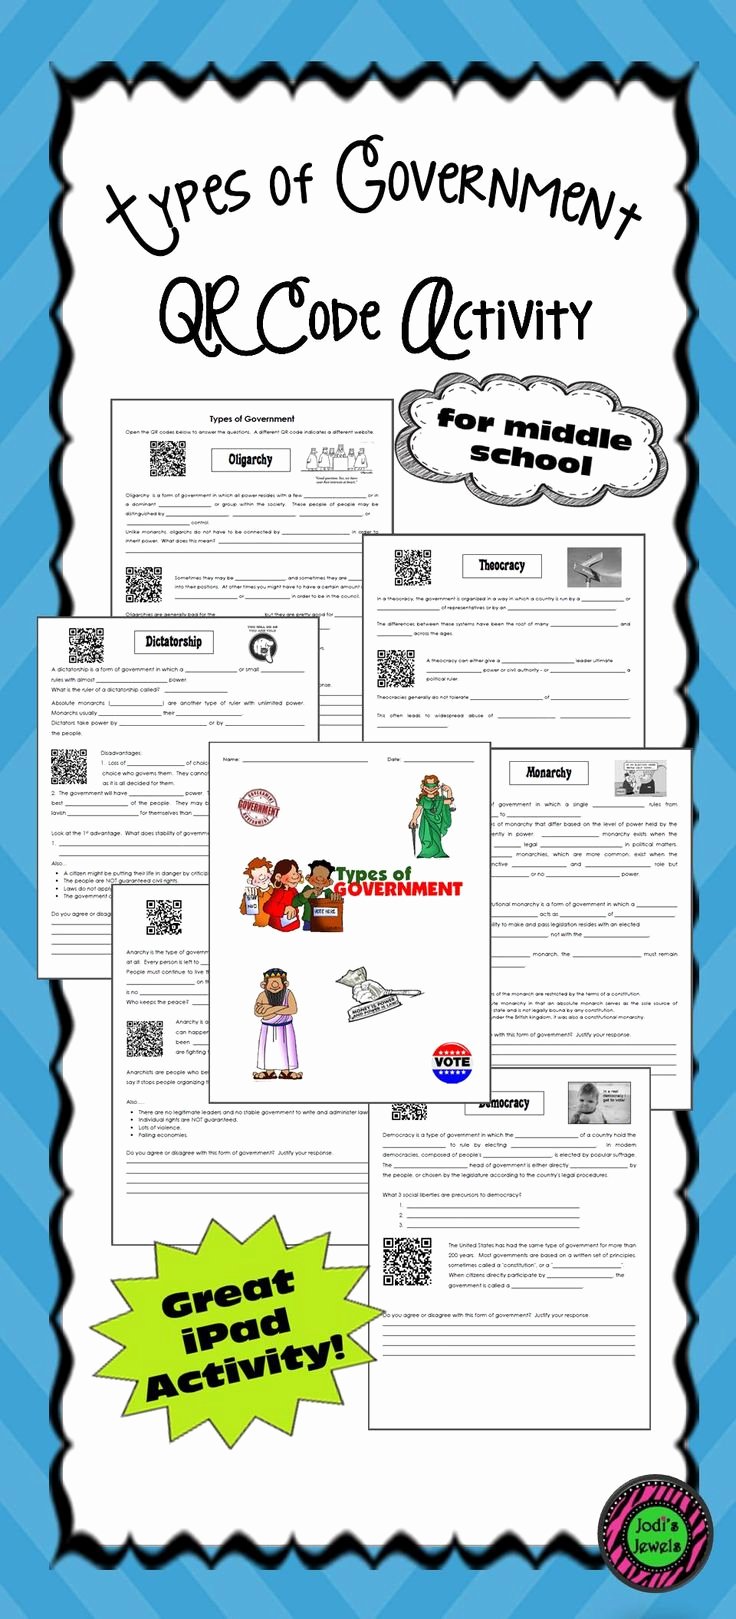 Types Of Government Worksheet Answers Best Of 569 Best Images About Science social Stu S On Pinterest